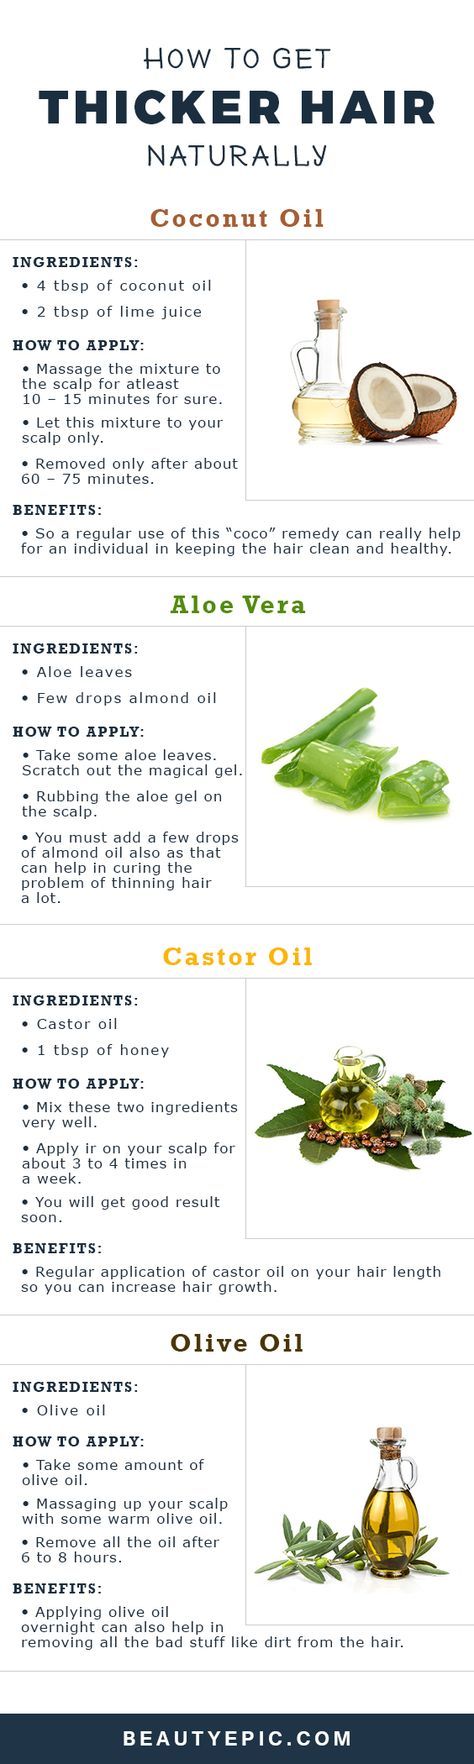 How To Get Thick Hair With Home Remedies?